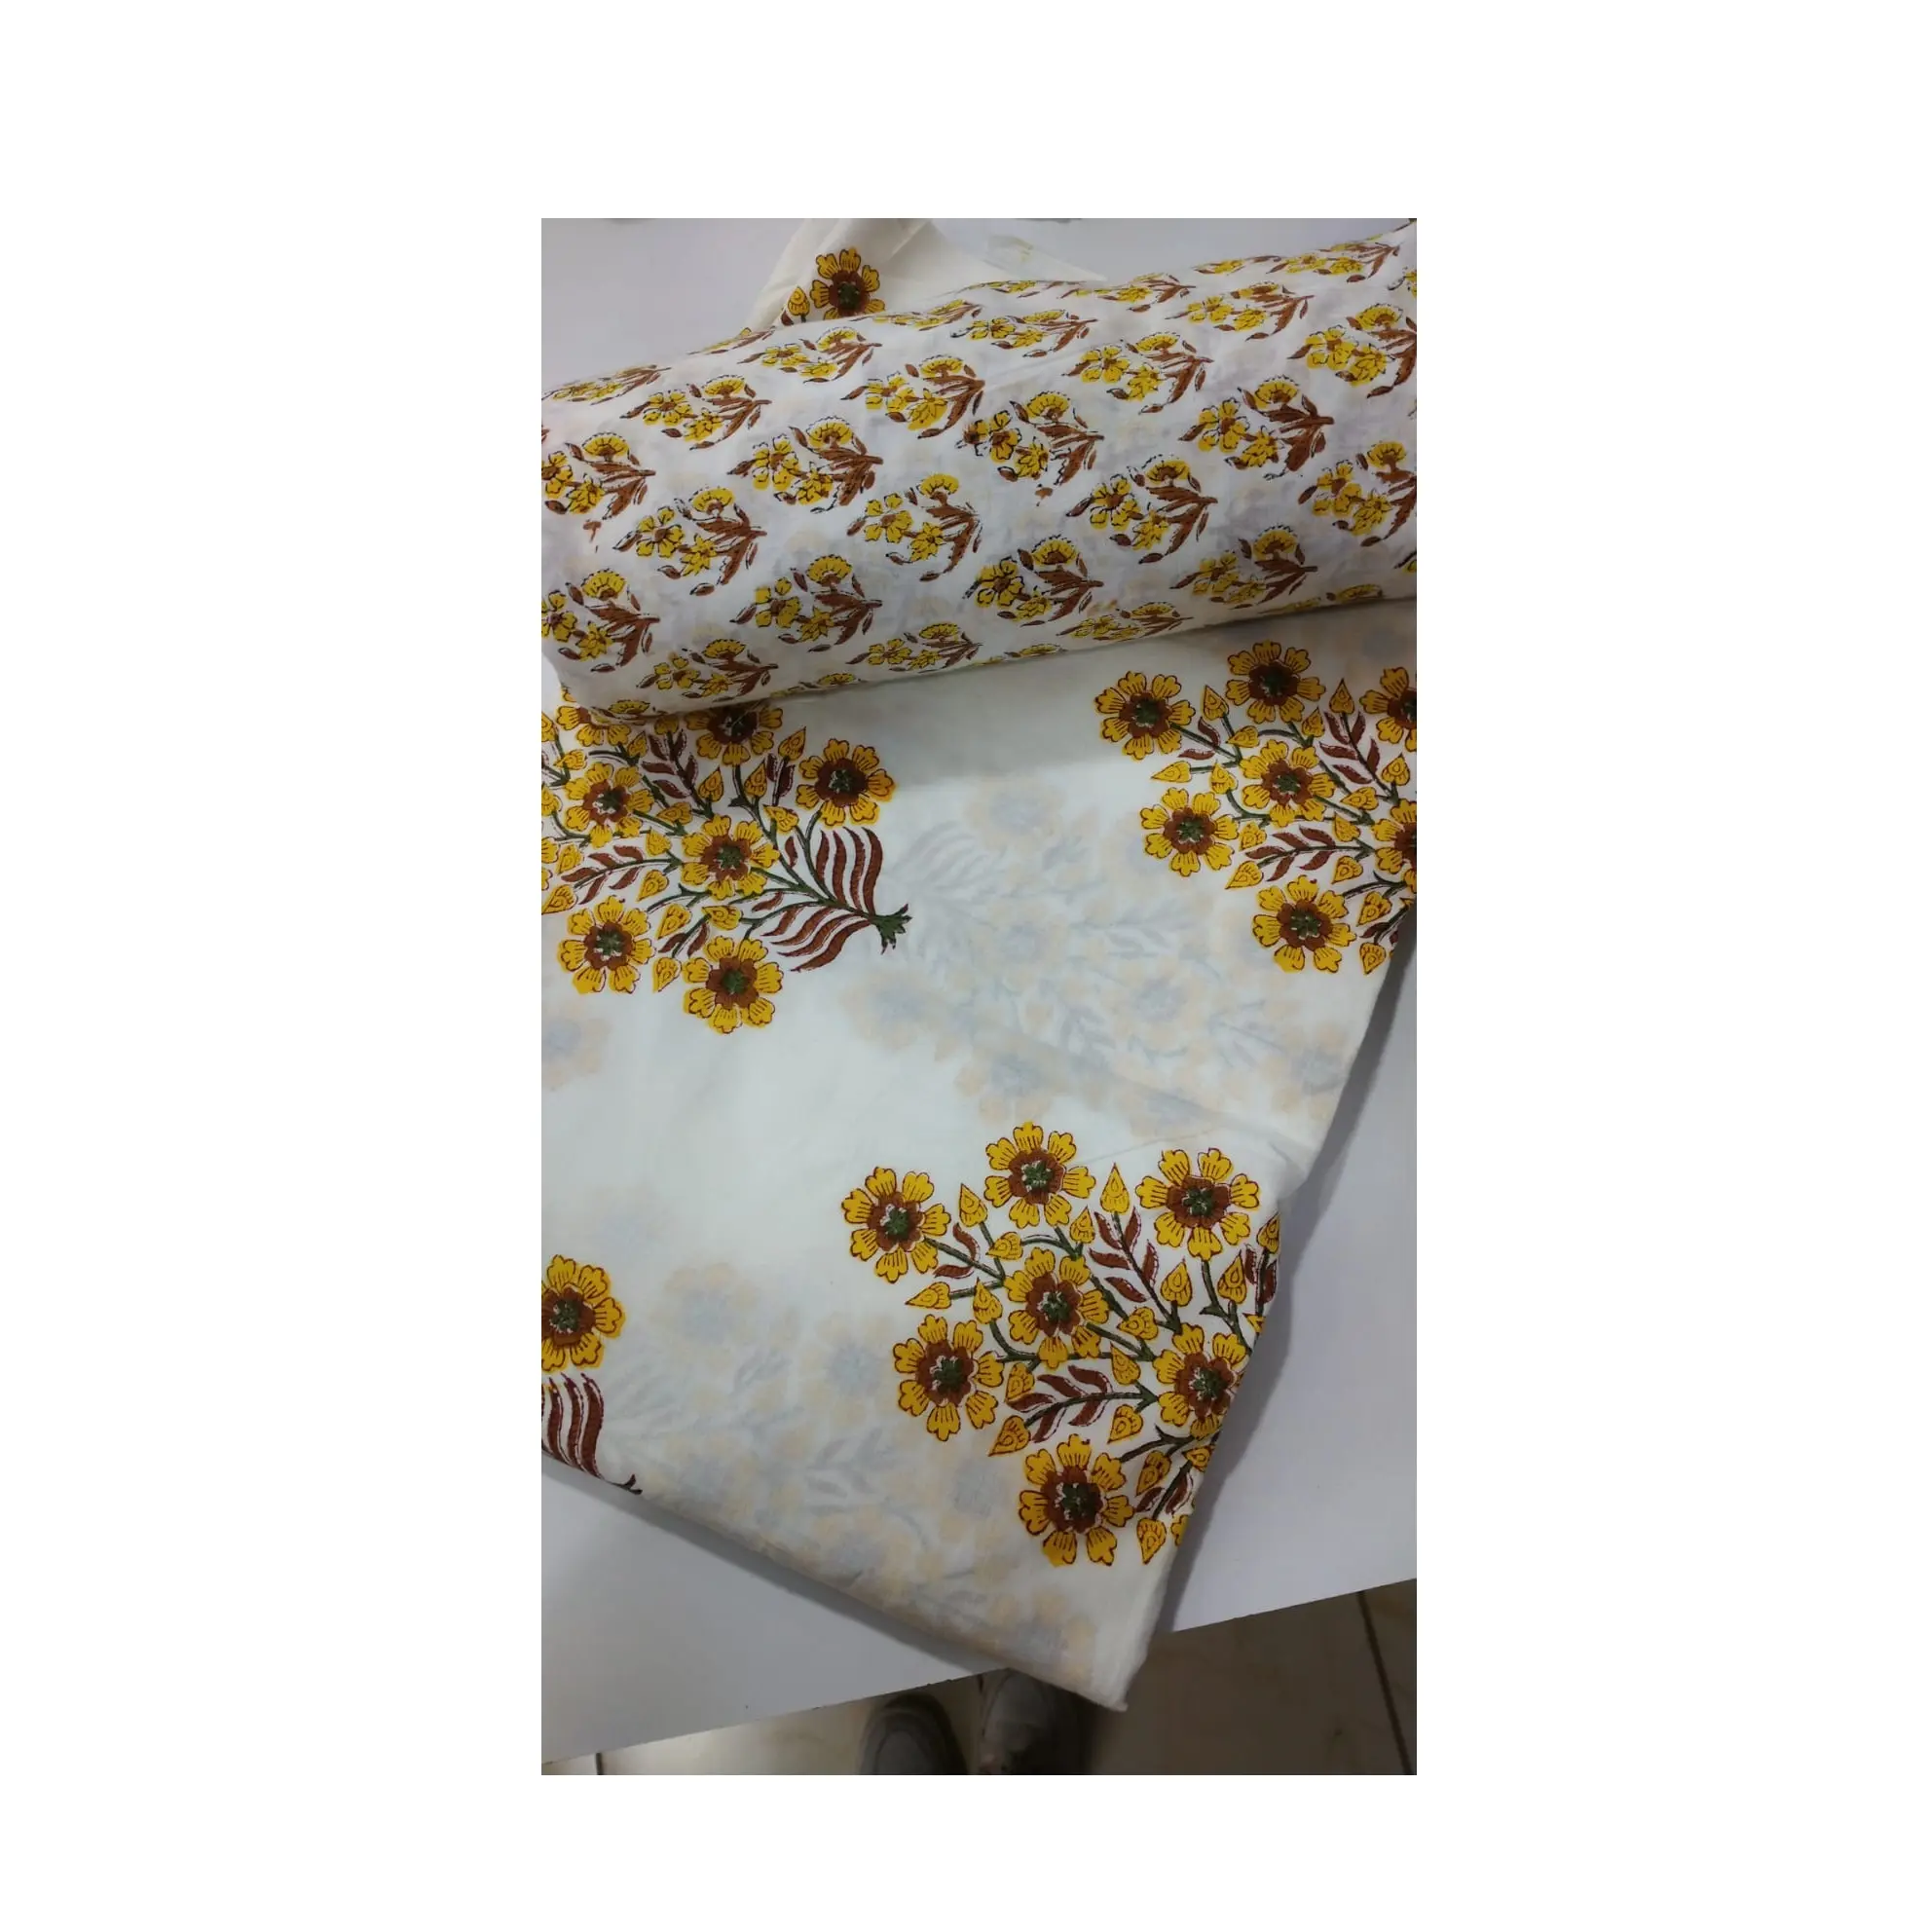 High Quality Poplin Cotton Fabric for Making Smooth and Crisp Cloth Such as Dress Shirts and Blouses